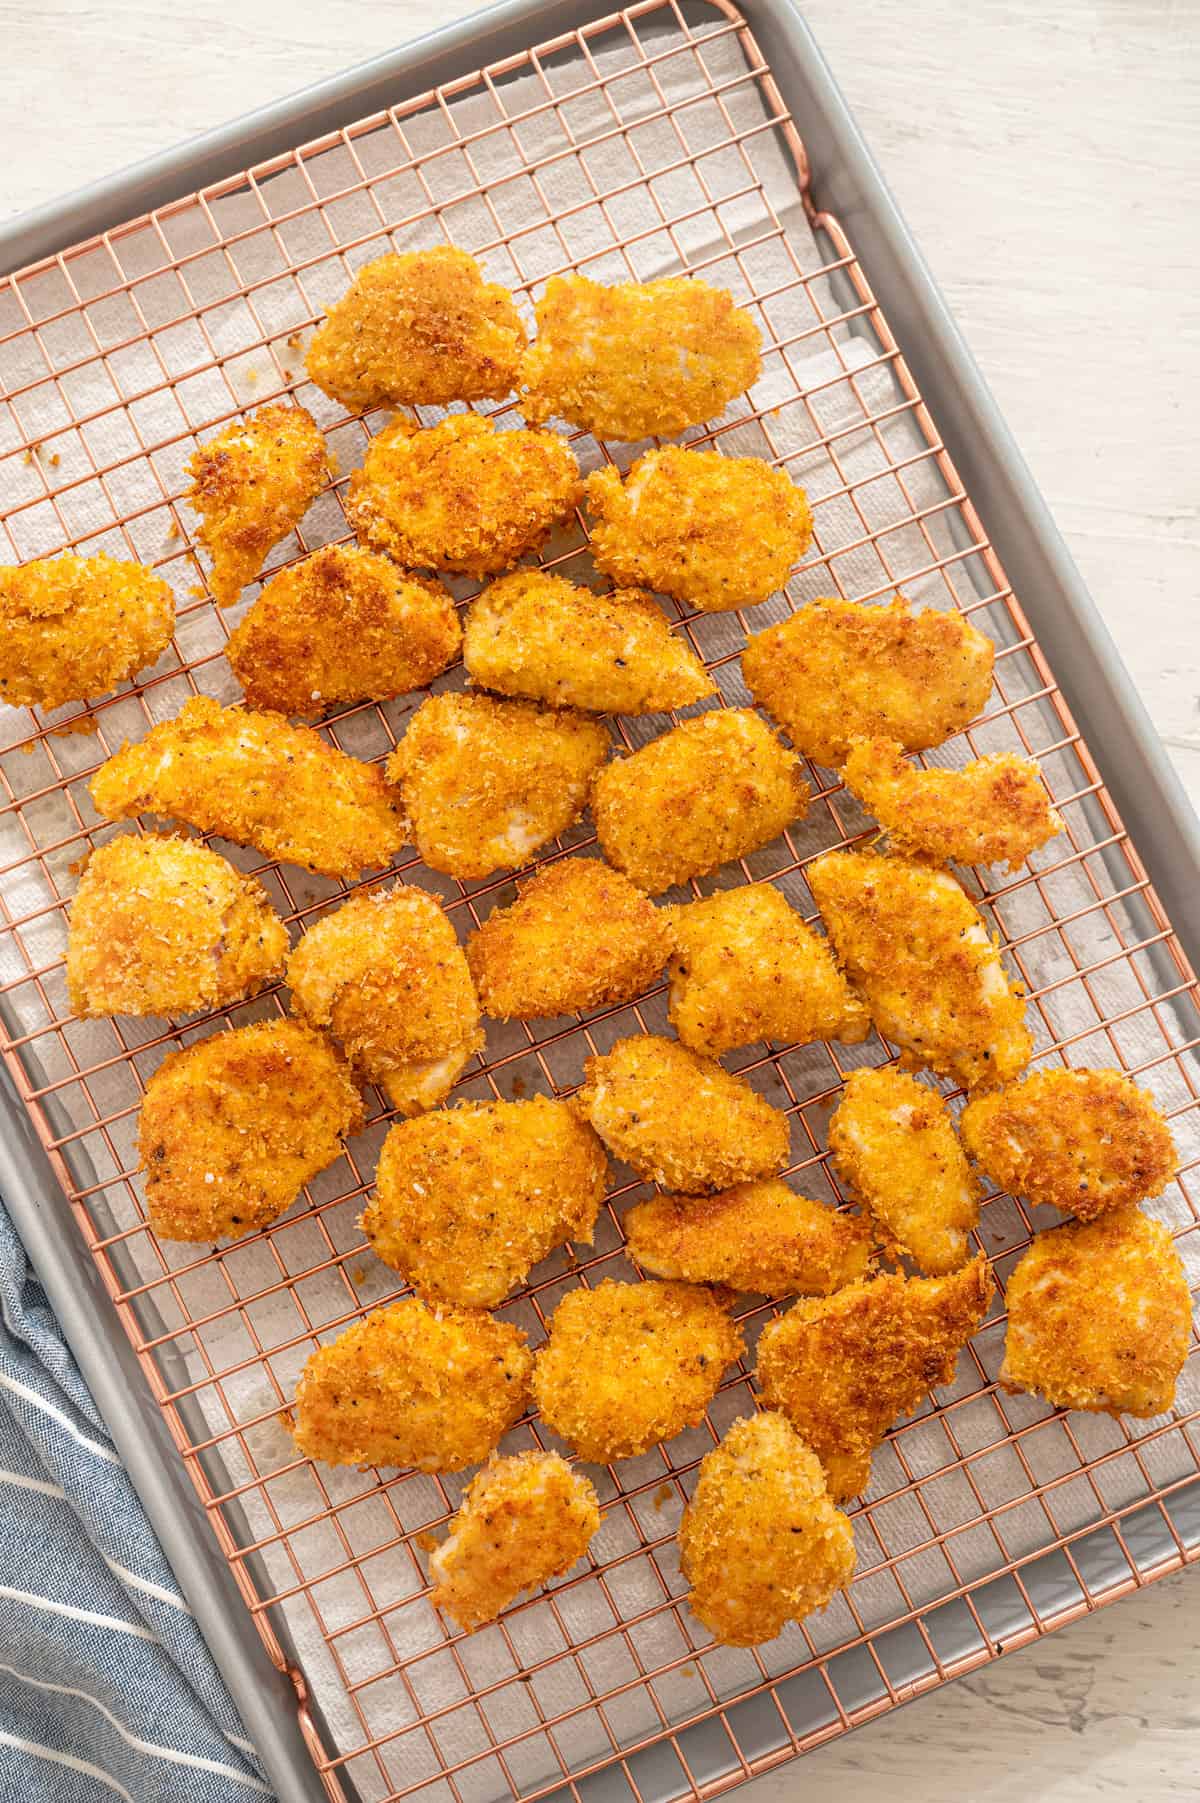 Homemade chicken nuggets on a cooling rack on a baking sheet lined with parchment paper.